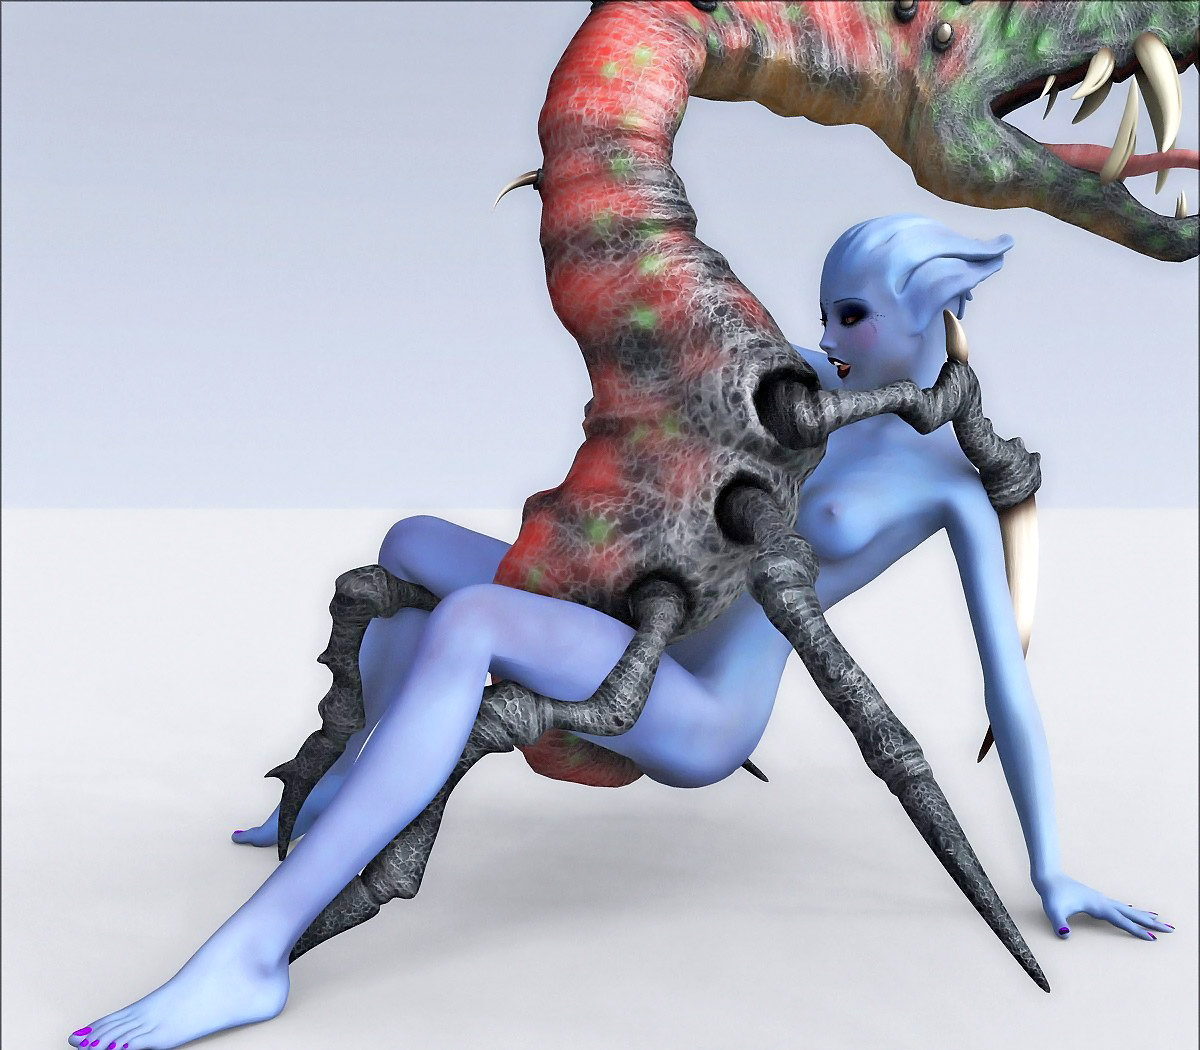 Alien Insect Porn - Brutal 3d gallery of an alien babe having sex with a slimy monster. |  KingdomOfEvil 3d